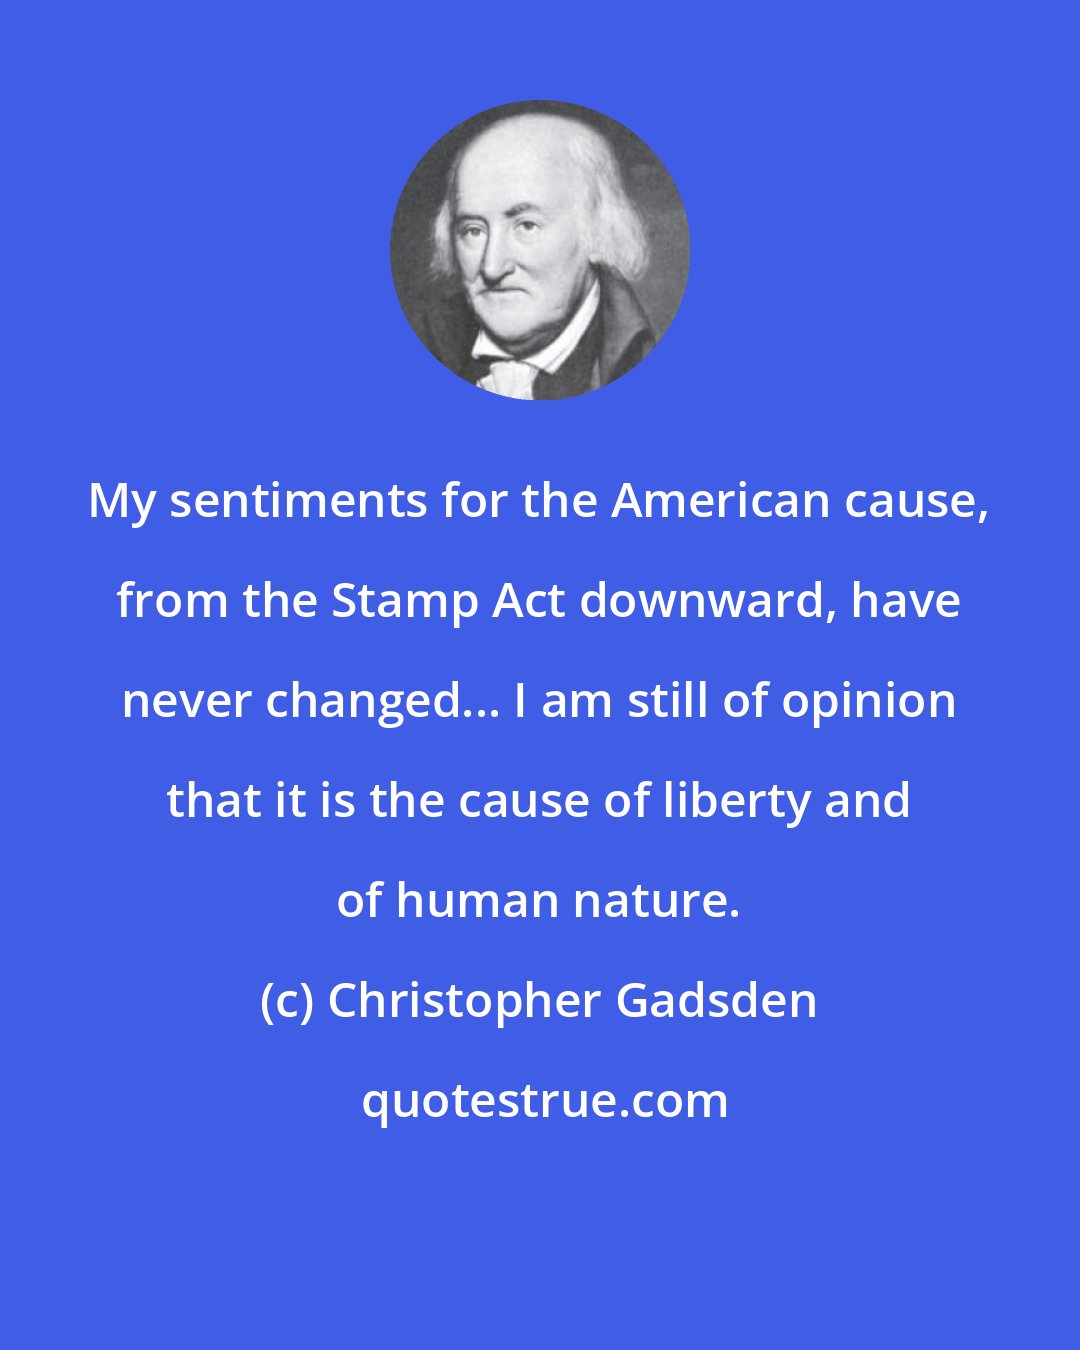 Christopher Gadsden: My sentiments for the American cause, from the Stamp Act downward, have never changed... I am still of opinion that it is the cause of liberty and of human nature.